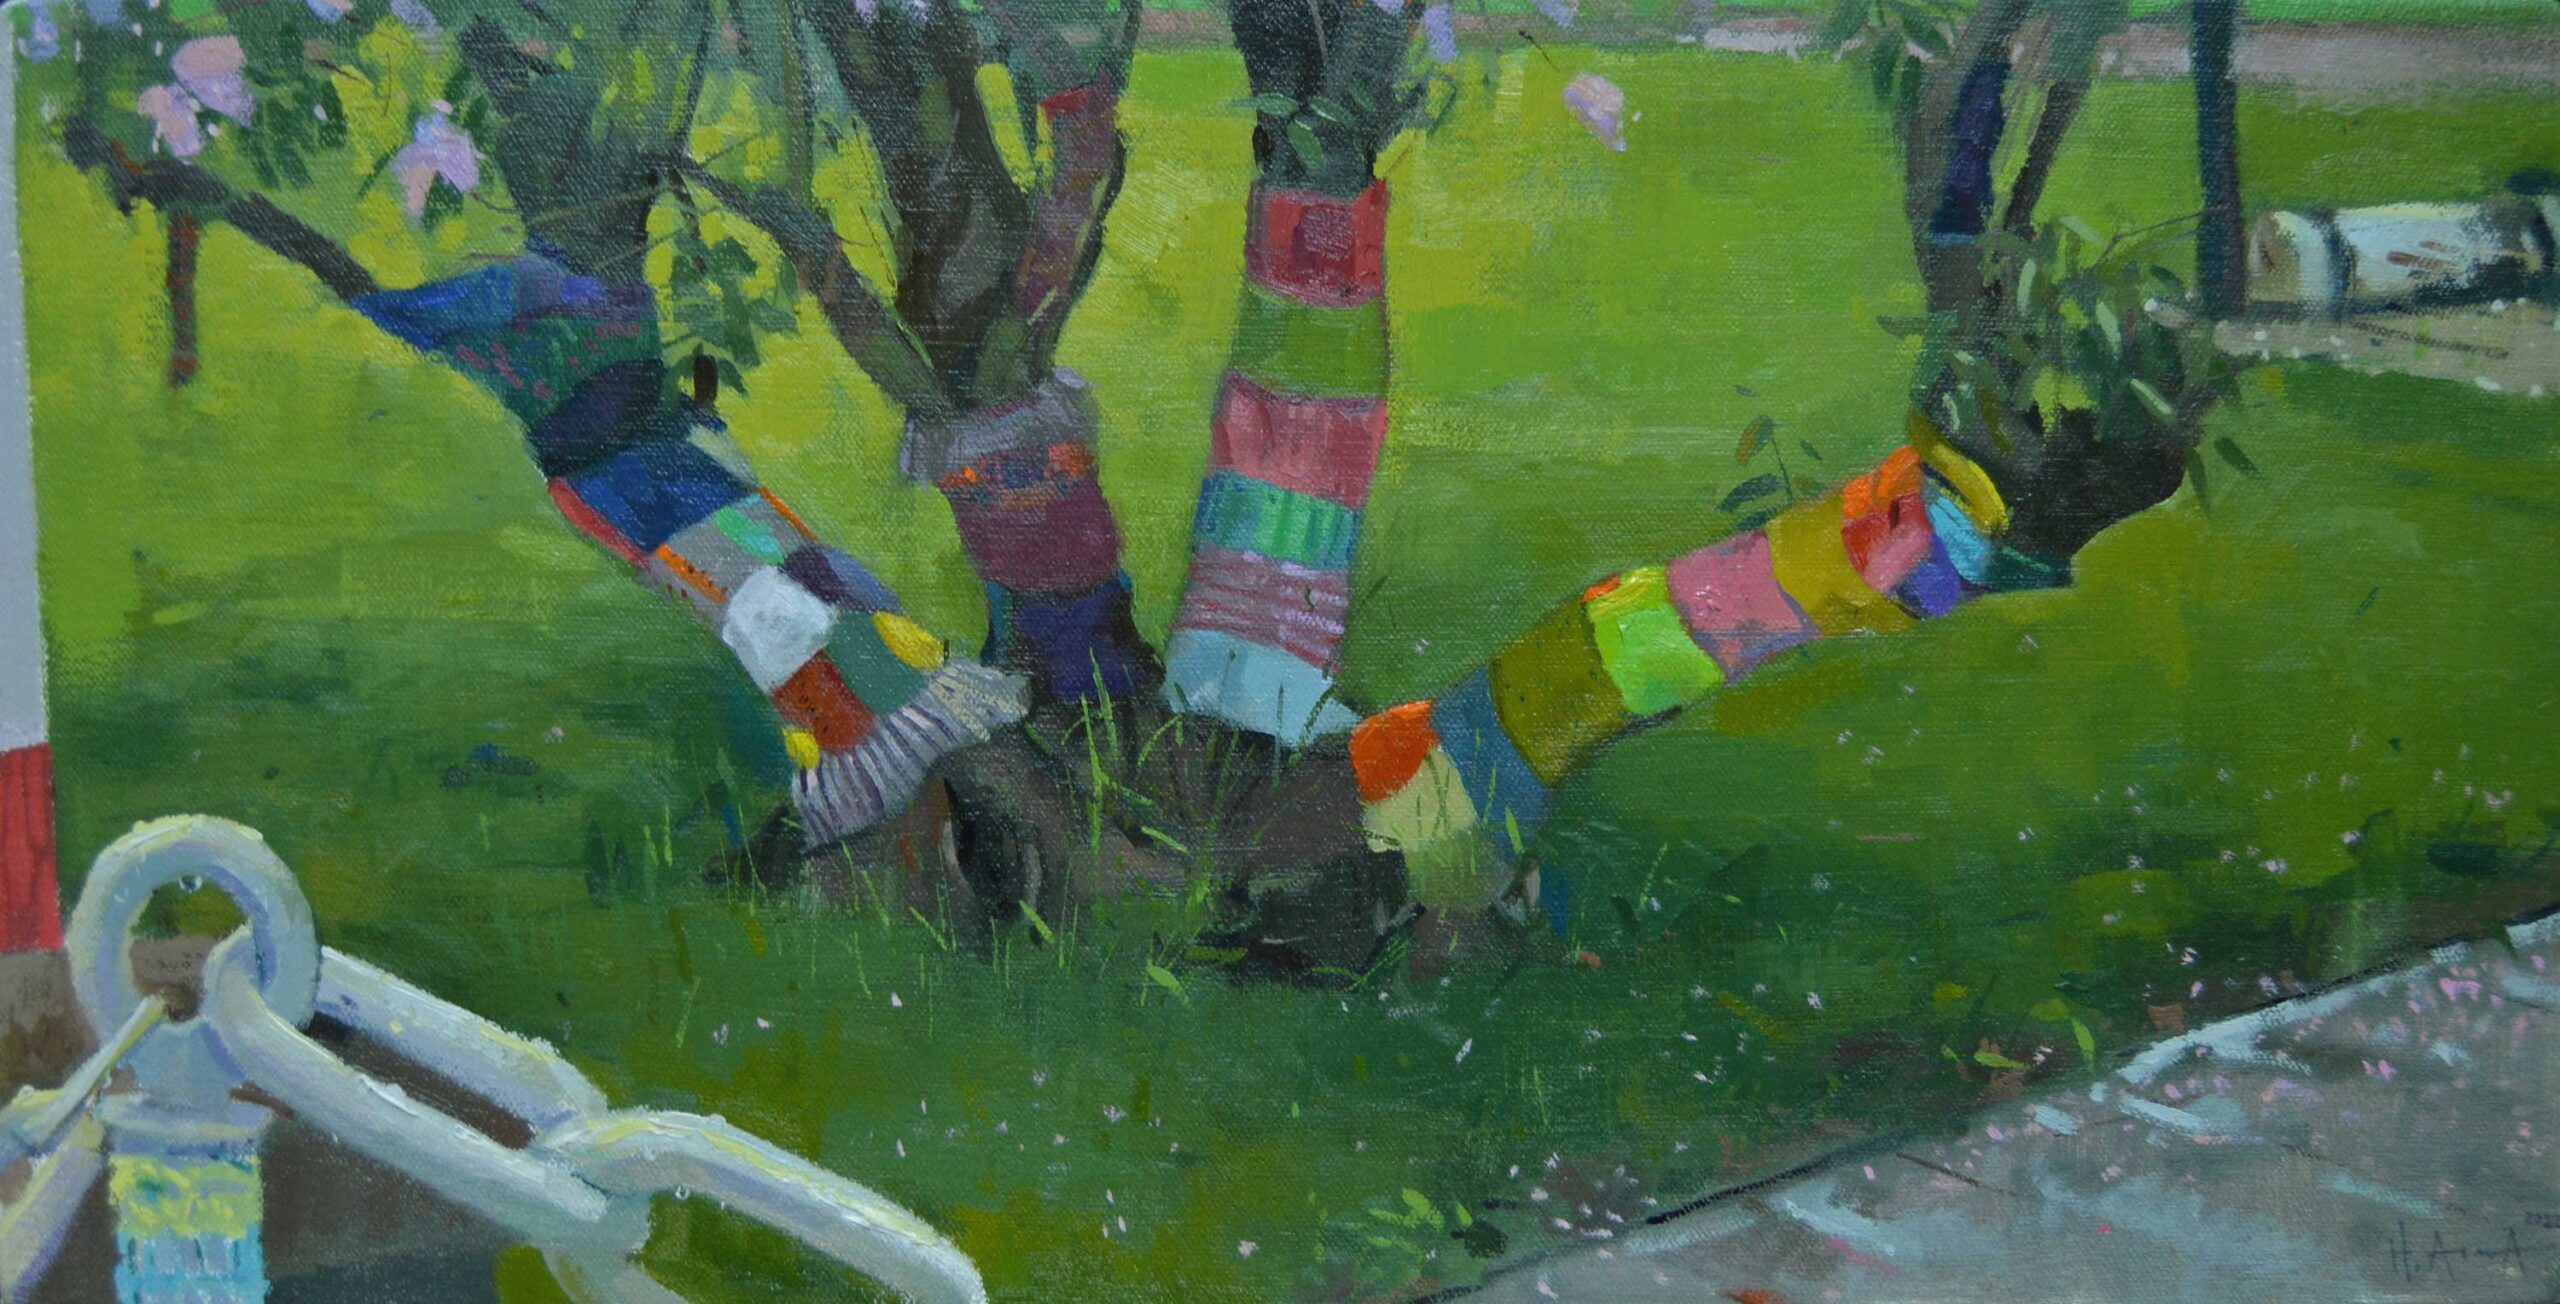 Hector Arcuna, "Yarn Bomb in Port," 2022, oil, 9 x 18 in., Private collection, plein air